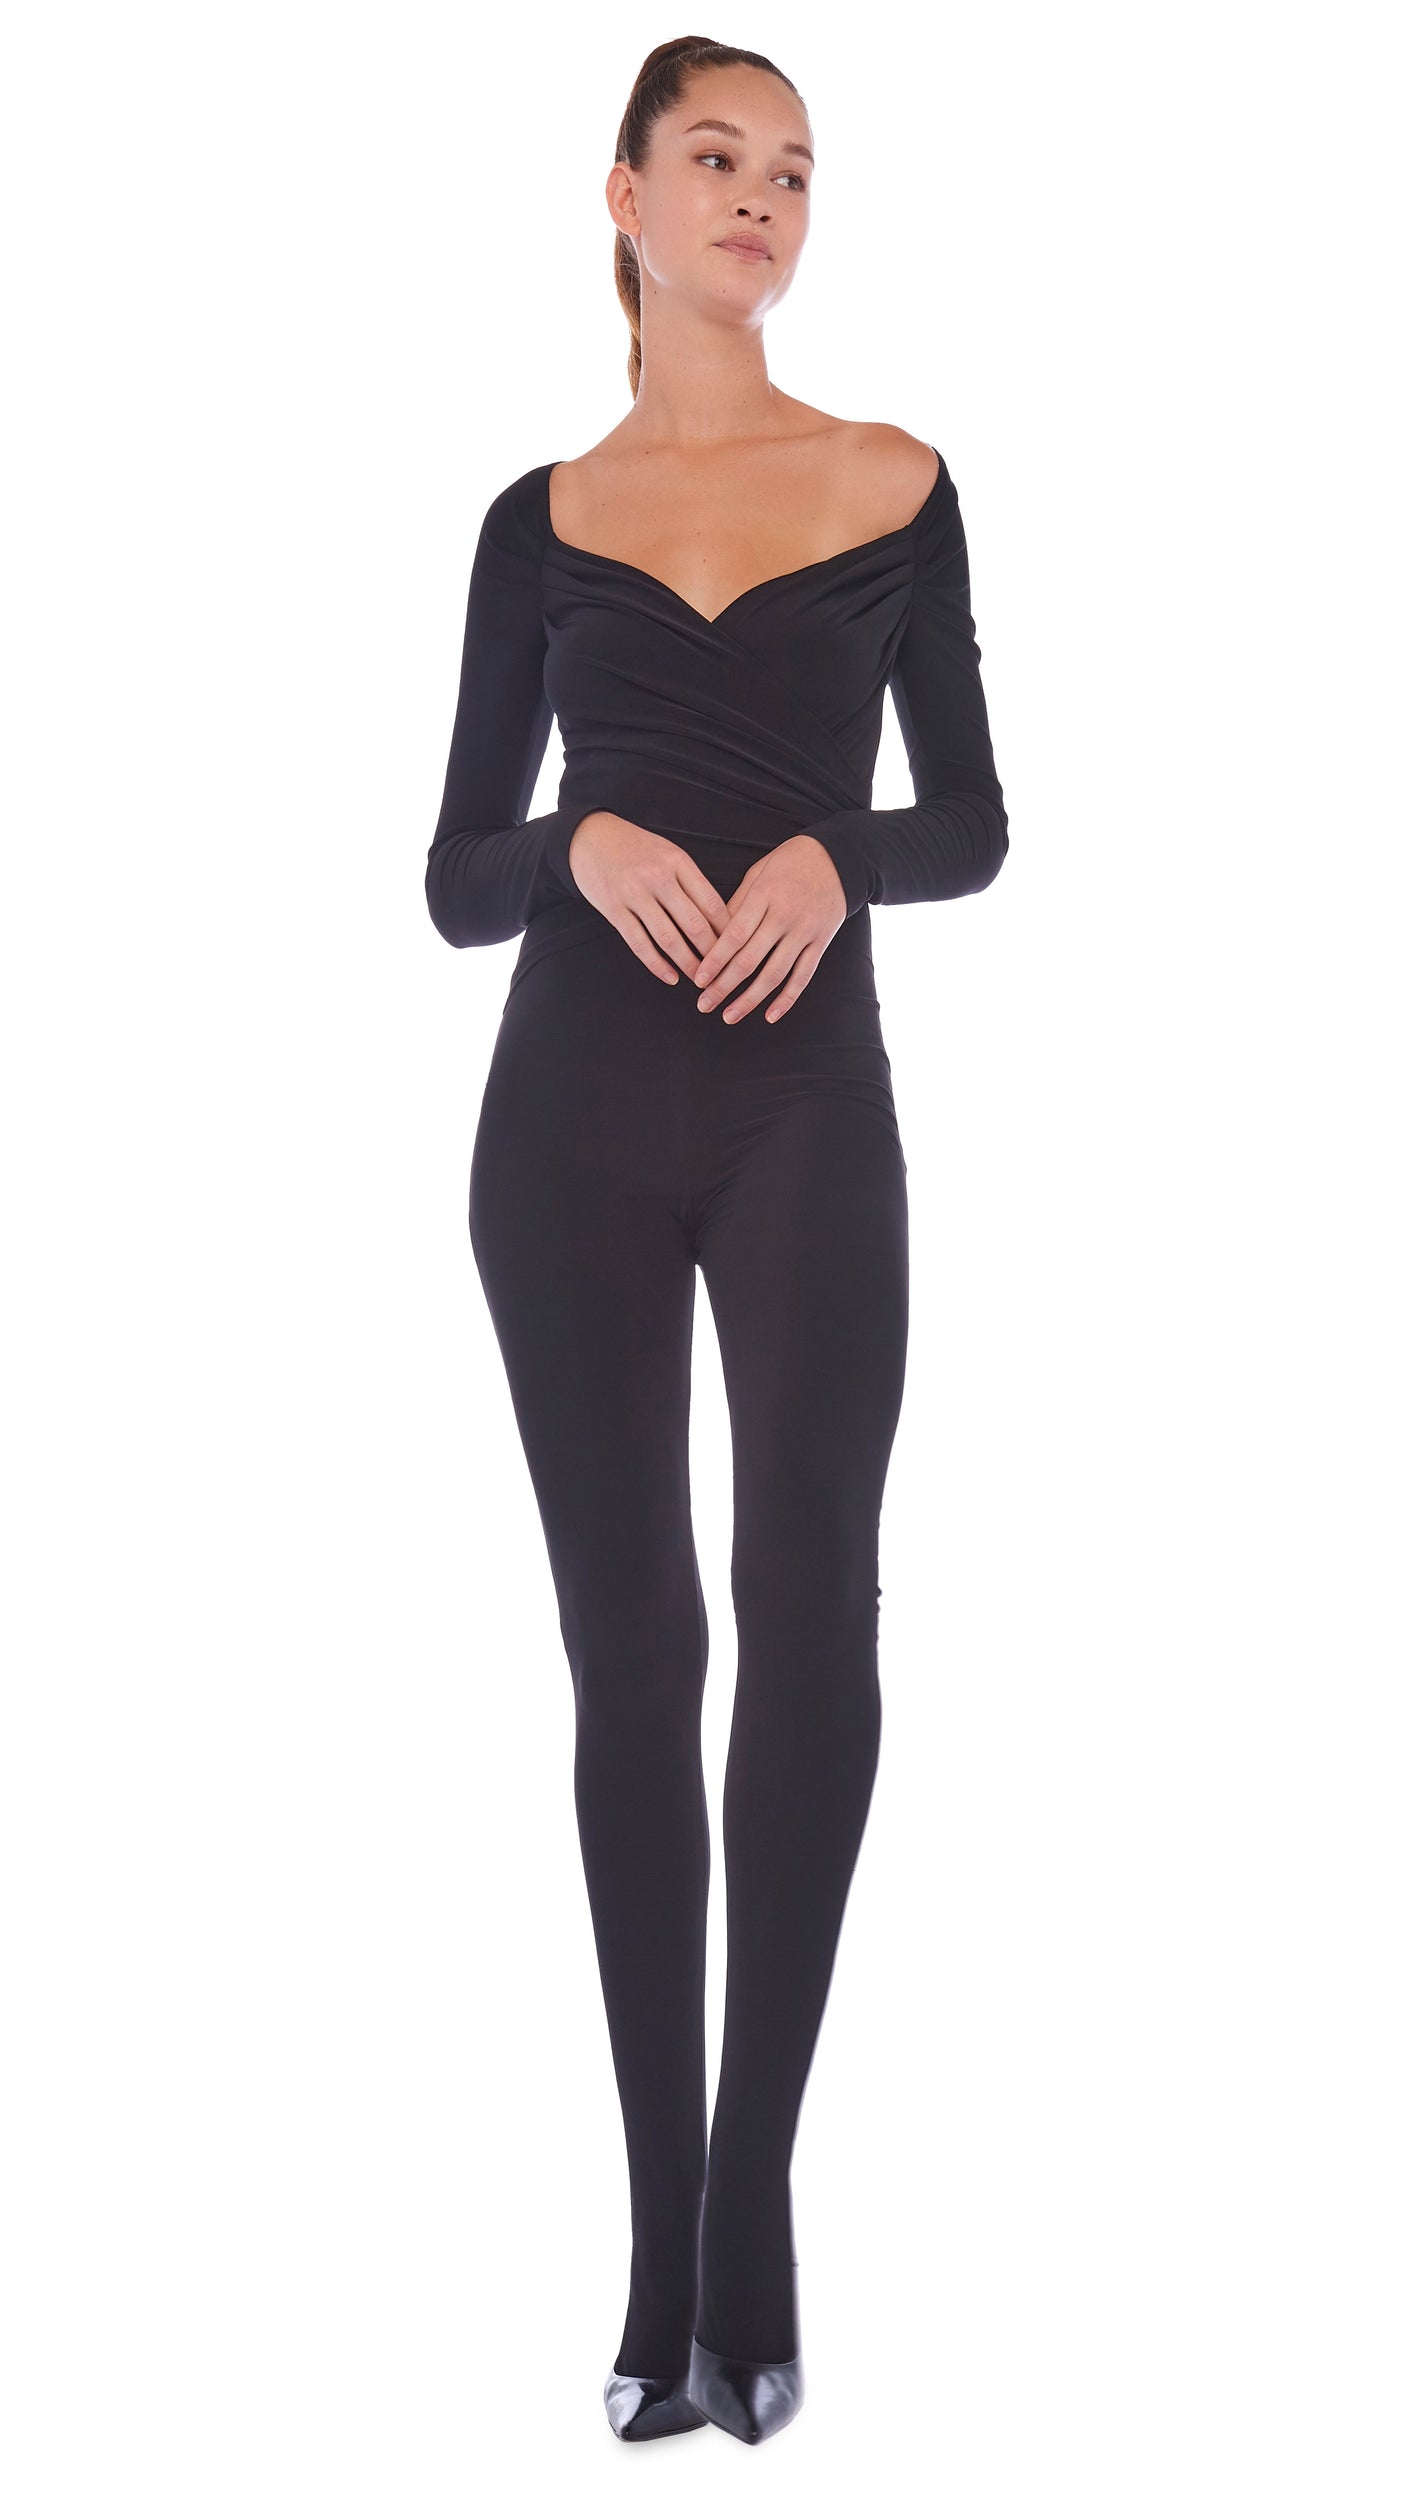 One Piece Above The Knee Full Body Girdle With Sleeves- Annette  Renolife-Style IC-3008